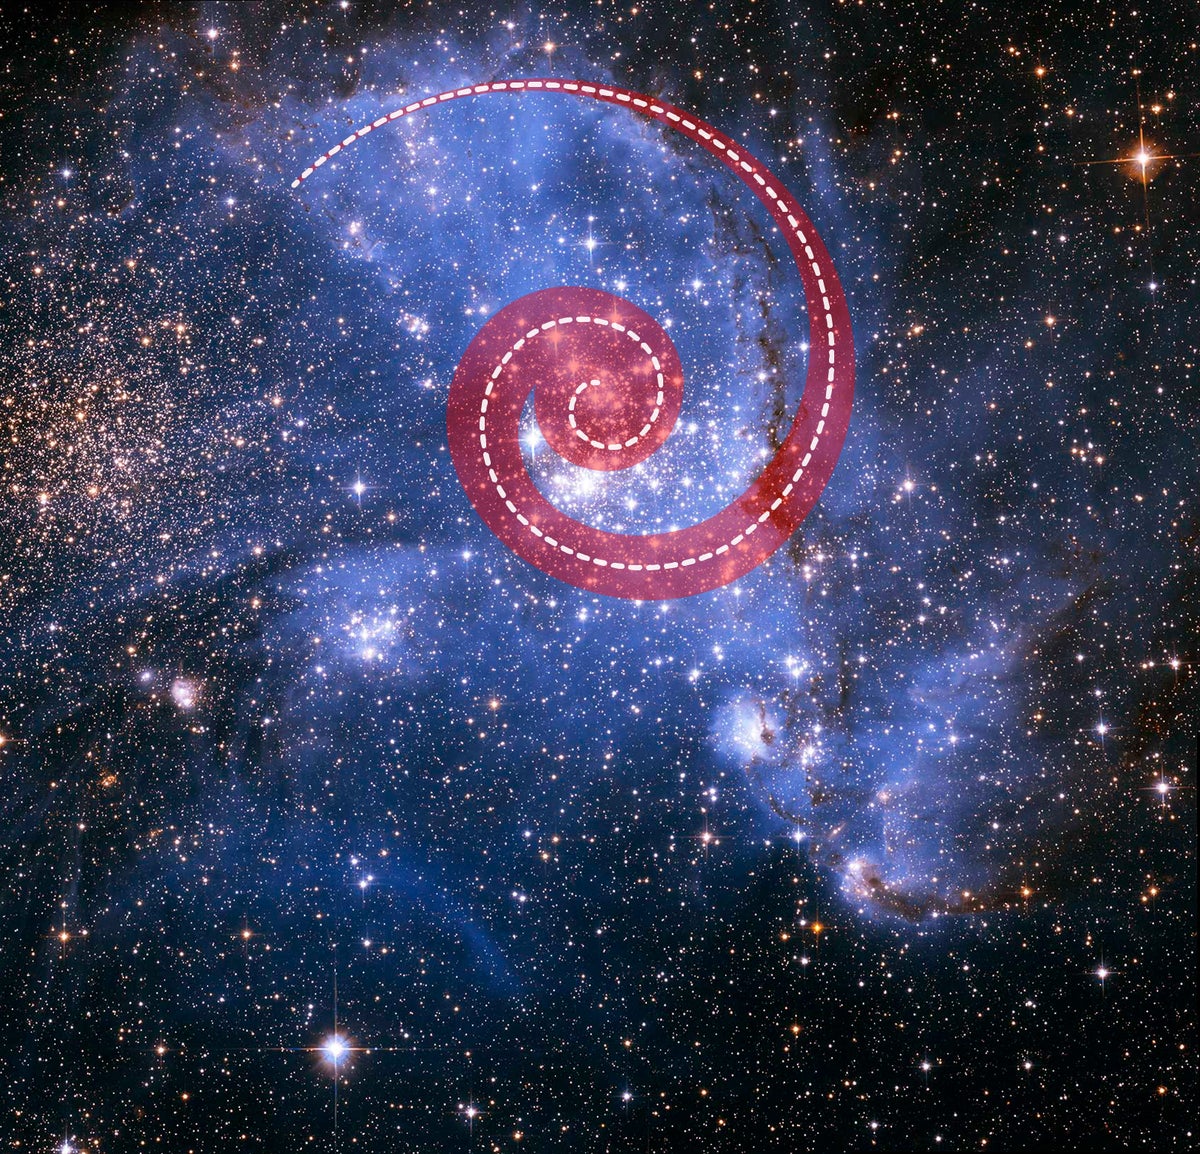 A dense stellar nursery may feed on a spiral of stars, scientists say